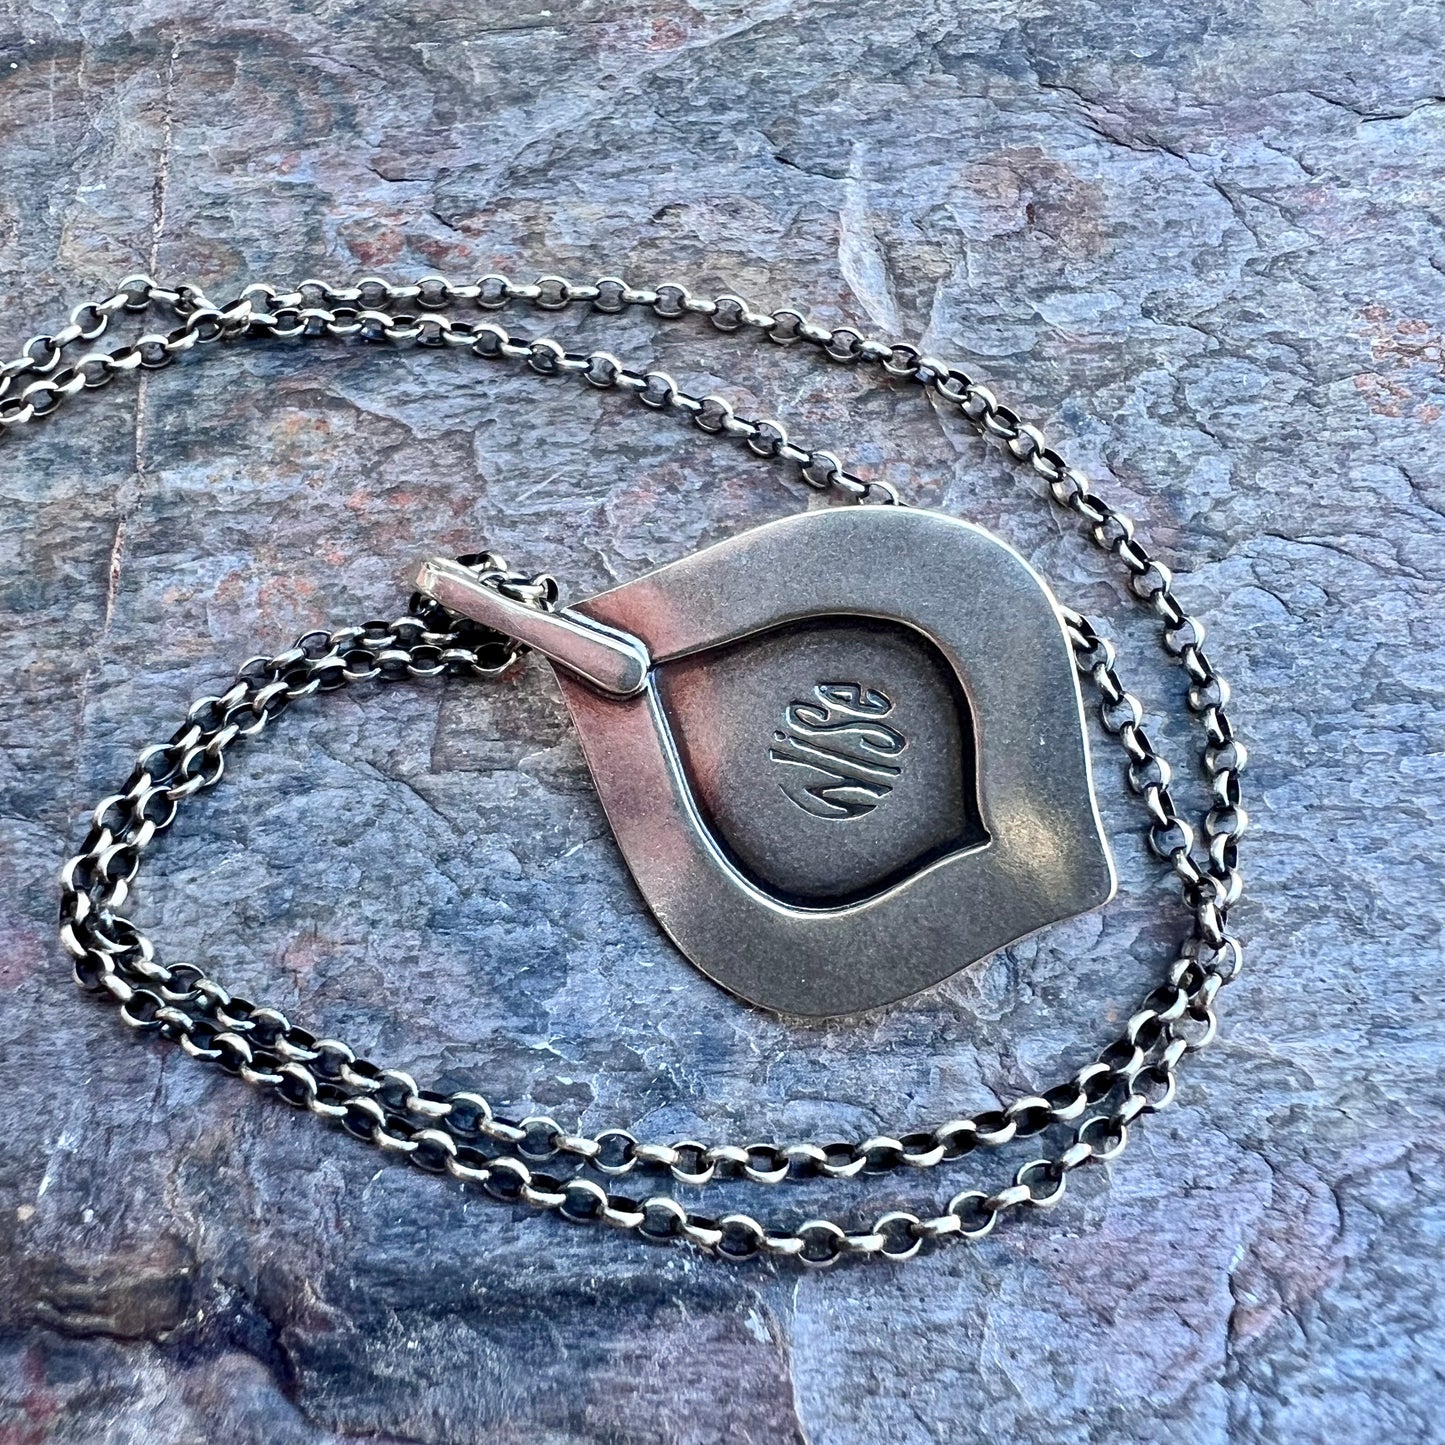 Mexican Opal Sterling Silver Necklace - Handmade One-of-a-kind Pendant on Sterling Silver Chain